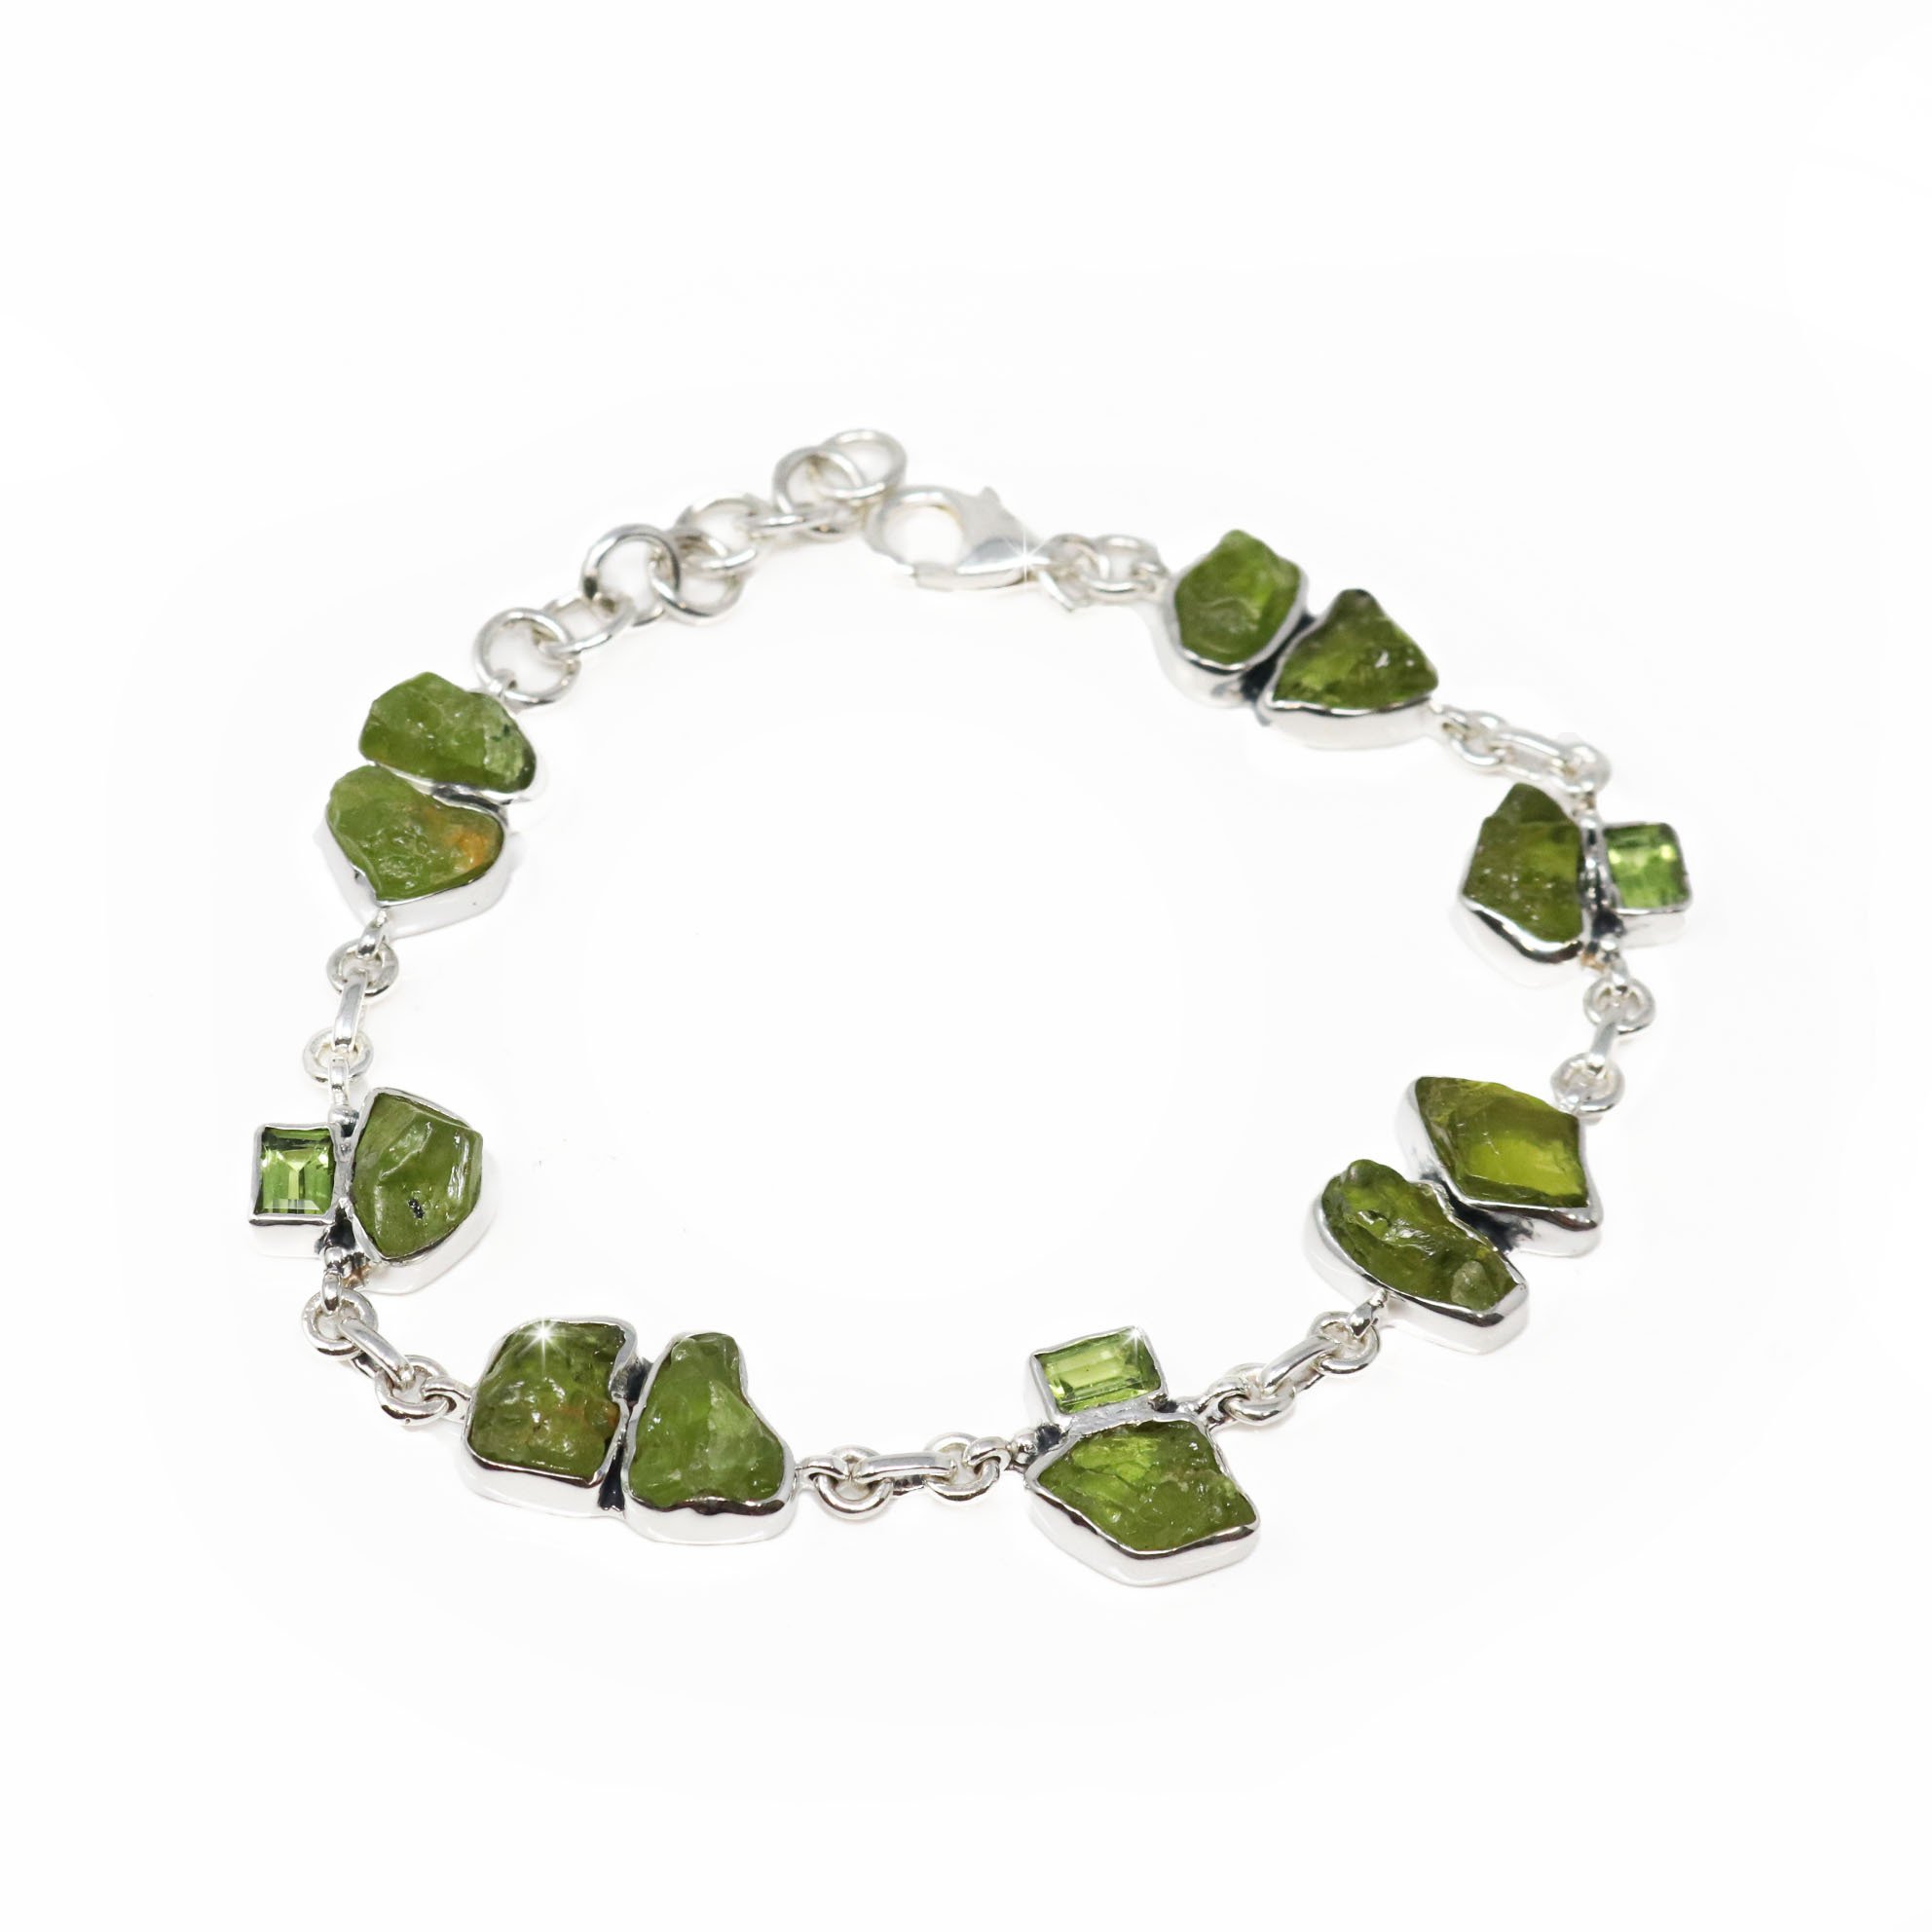 Peridot Link Bracelet - Rough Nuggets Pairs & Emerald Cut Rectangles With 925 Sterling Silver Bezels